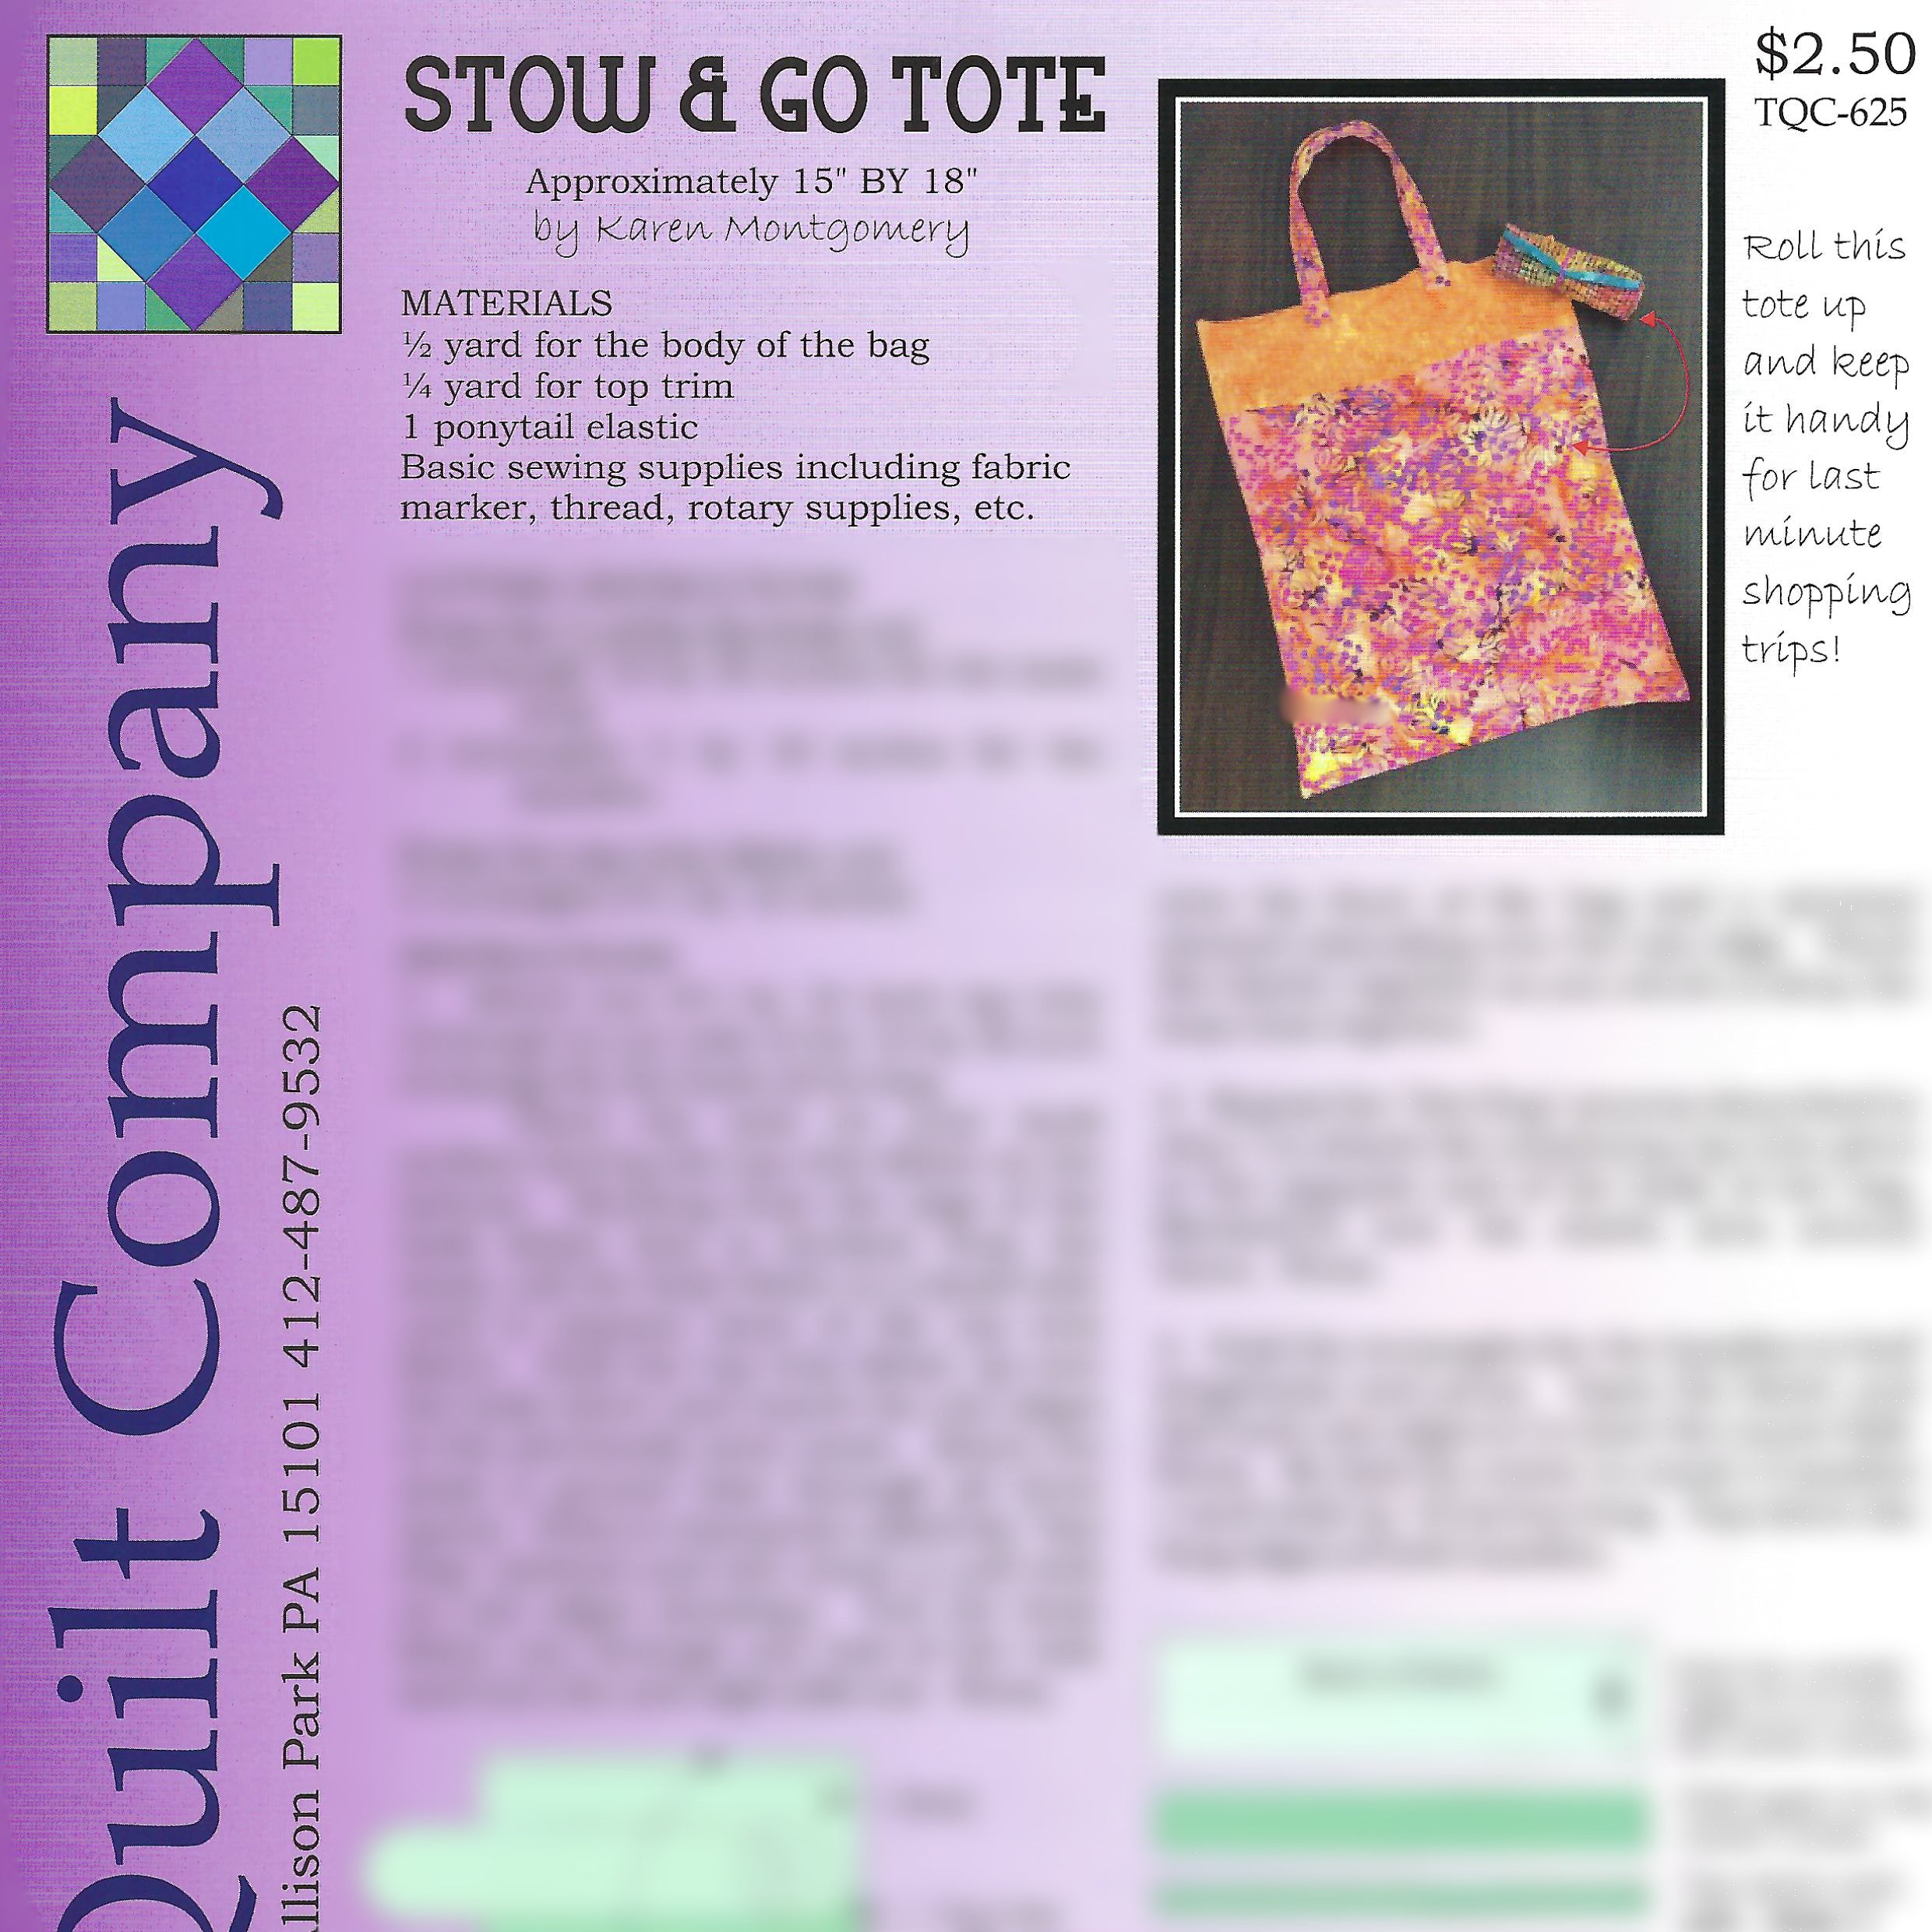 Stow & Go Tote Project Sheet